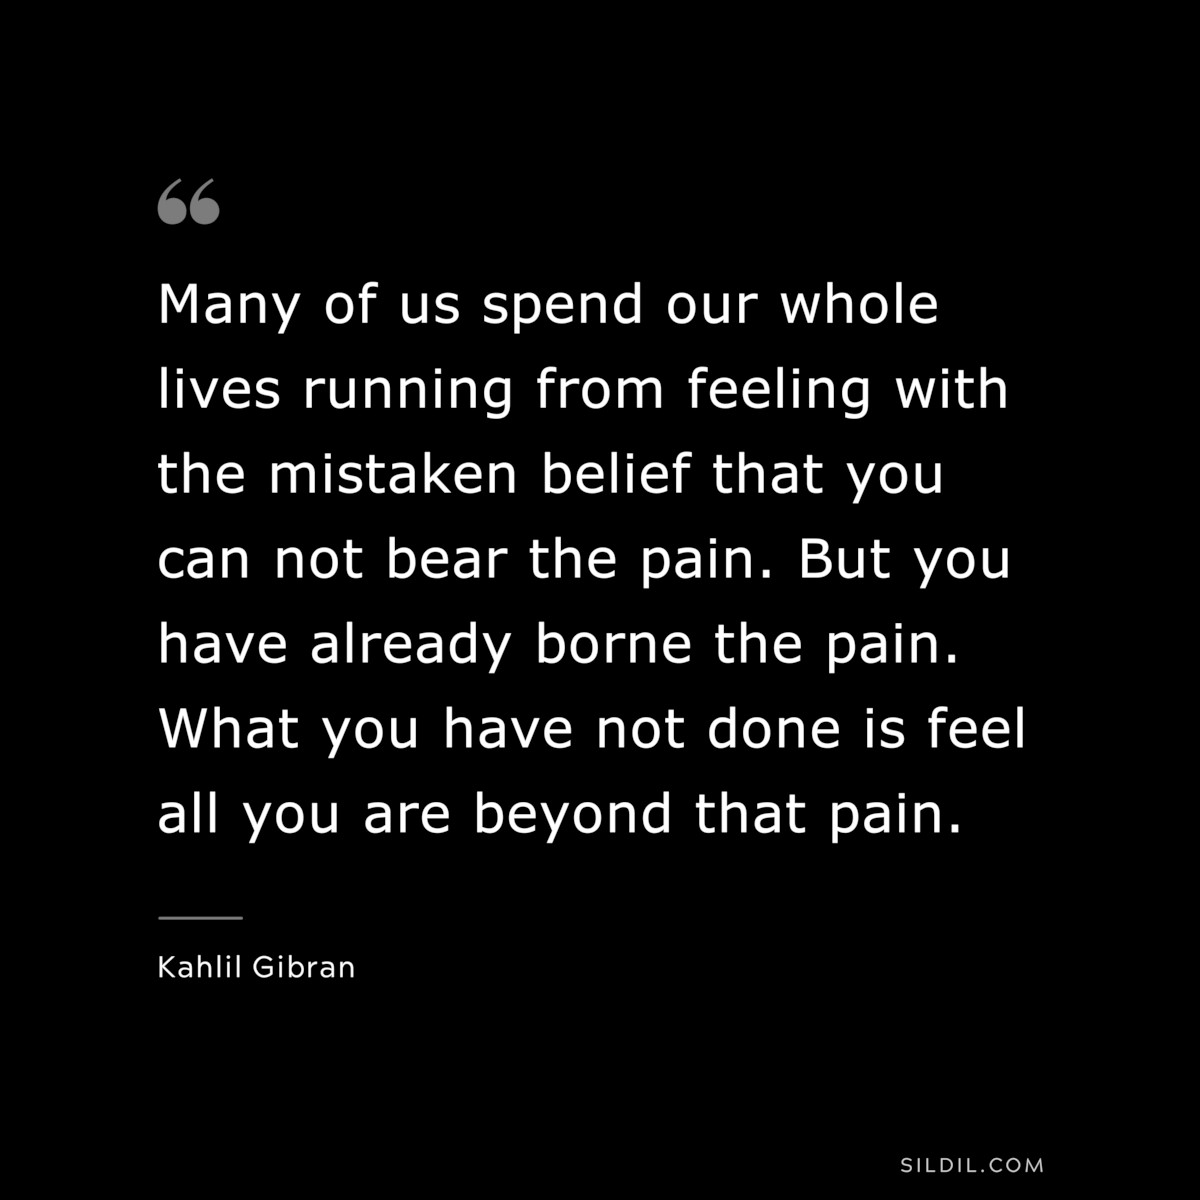 Many of us spend our whole lives running from feeling with the mistaken belief that you can not bear the pain. But you have already borne the pain. What you have not done is feel all you are beyond that pain. ― Kahlil Gibran